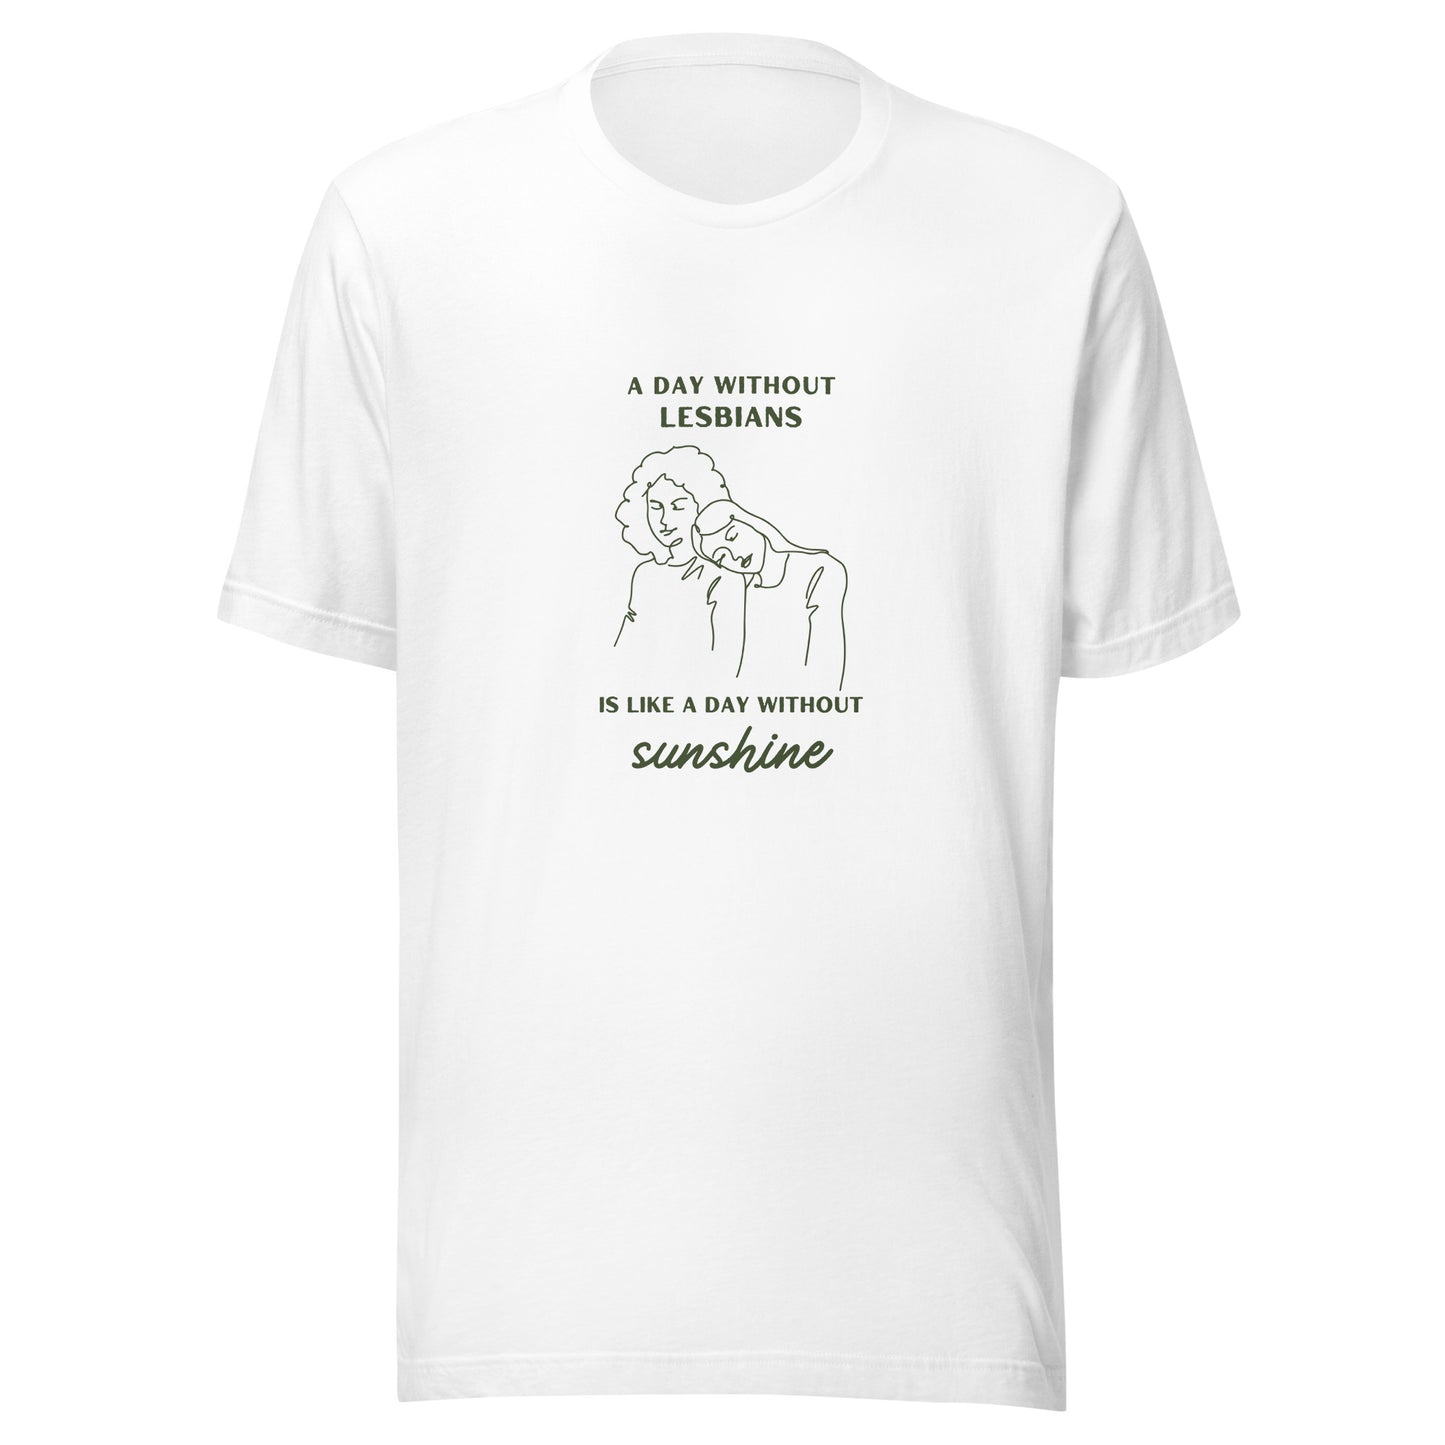 A Day Without Lesbians T-shirt